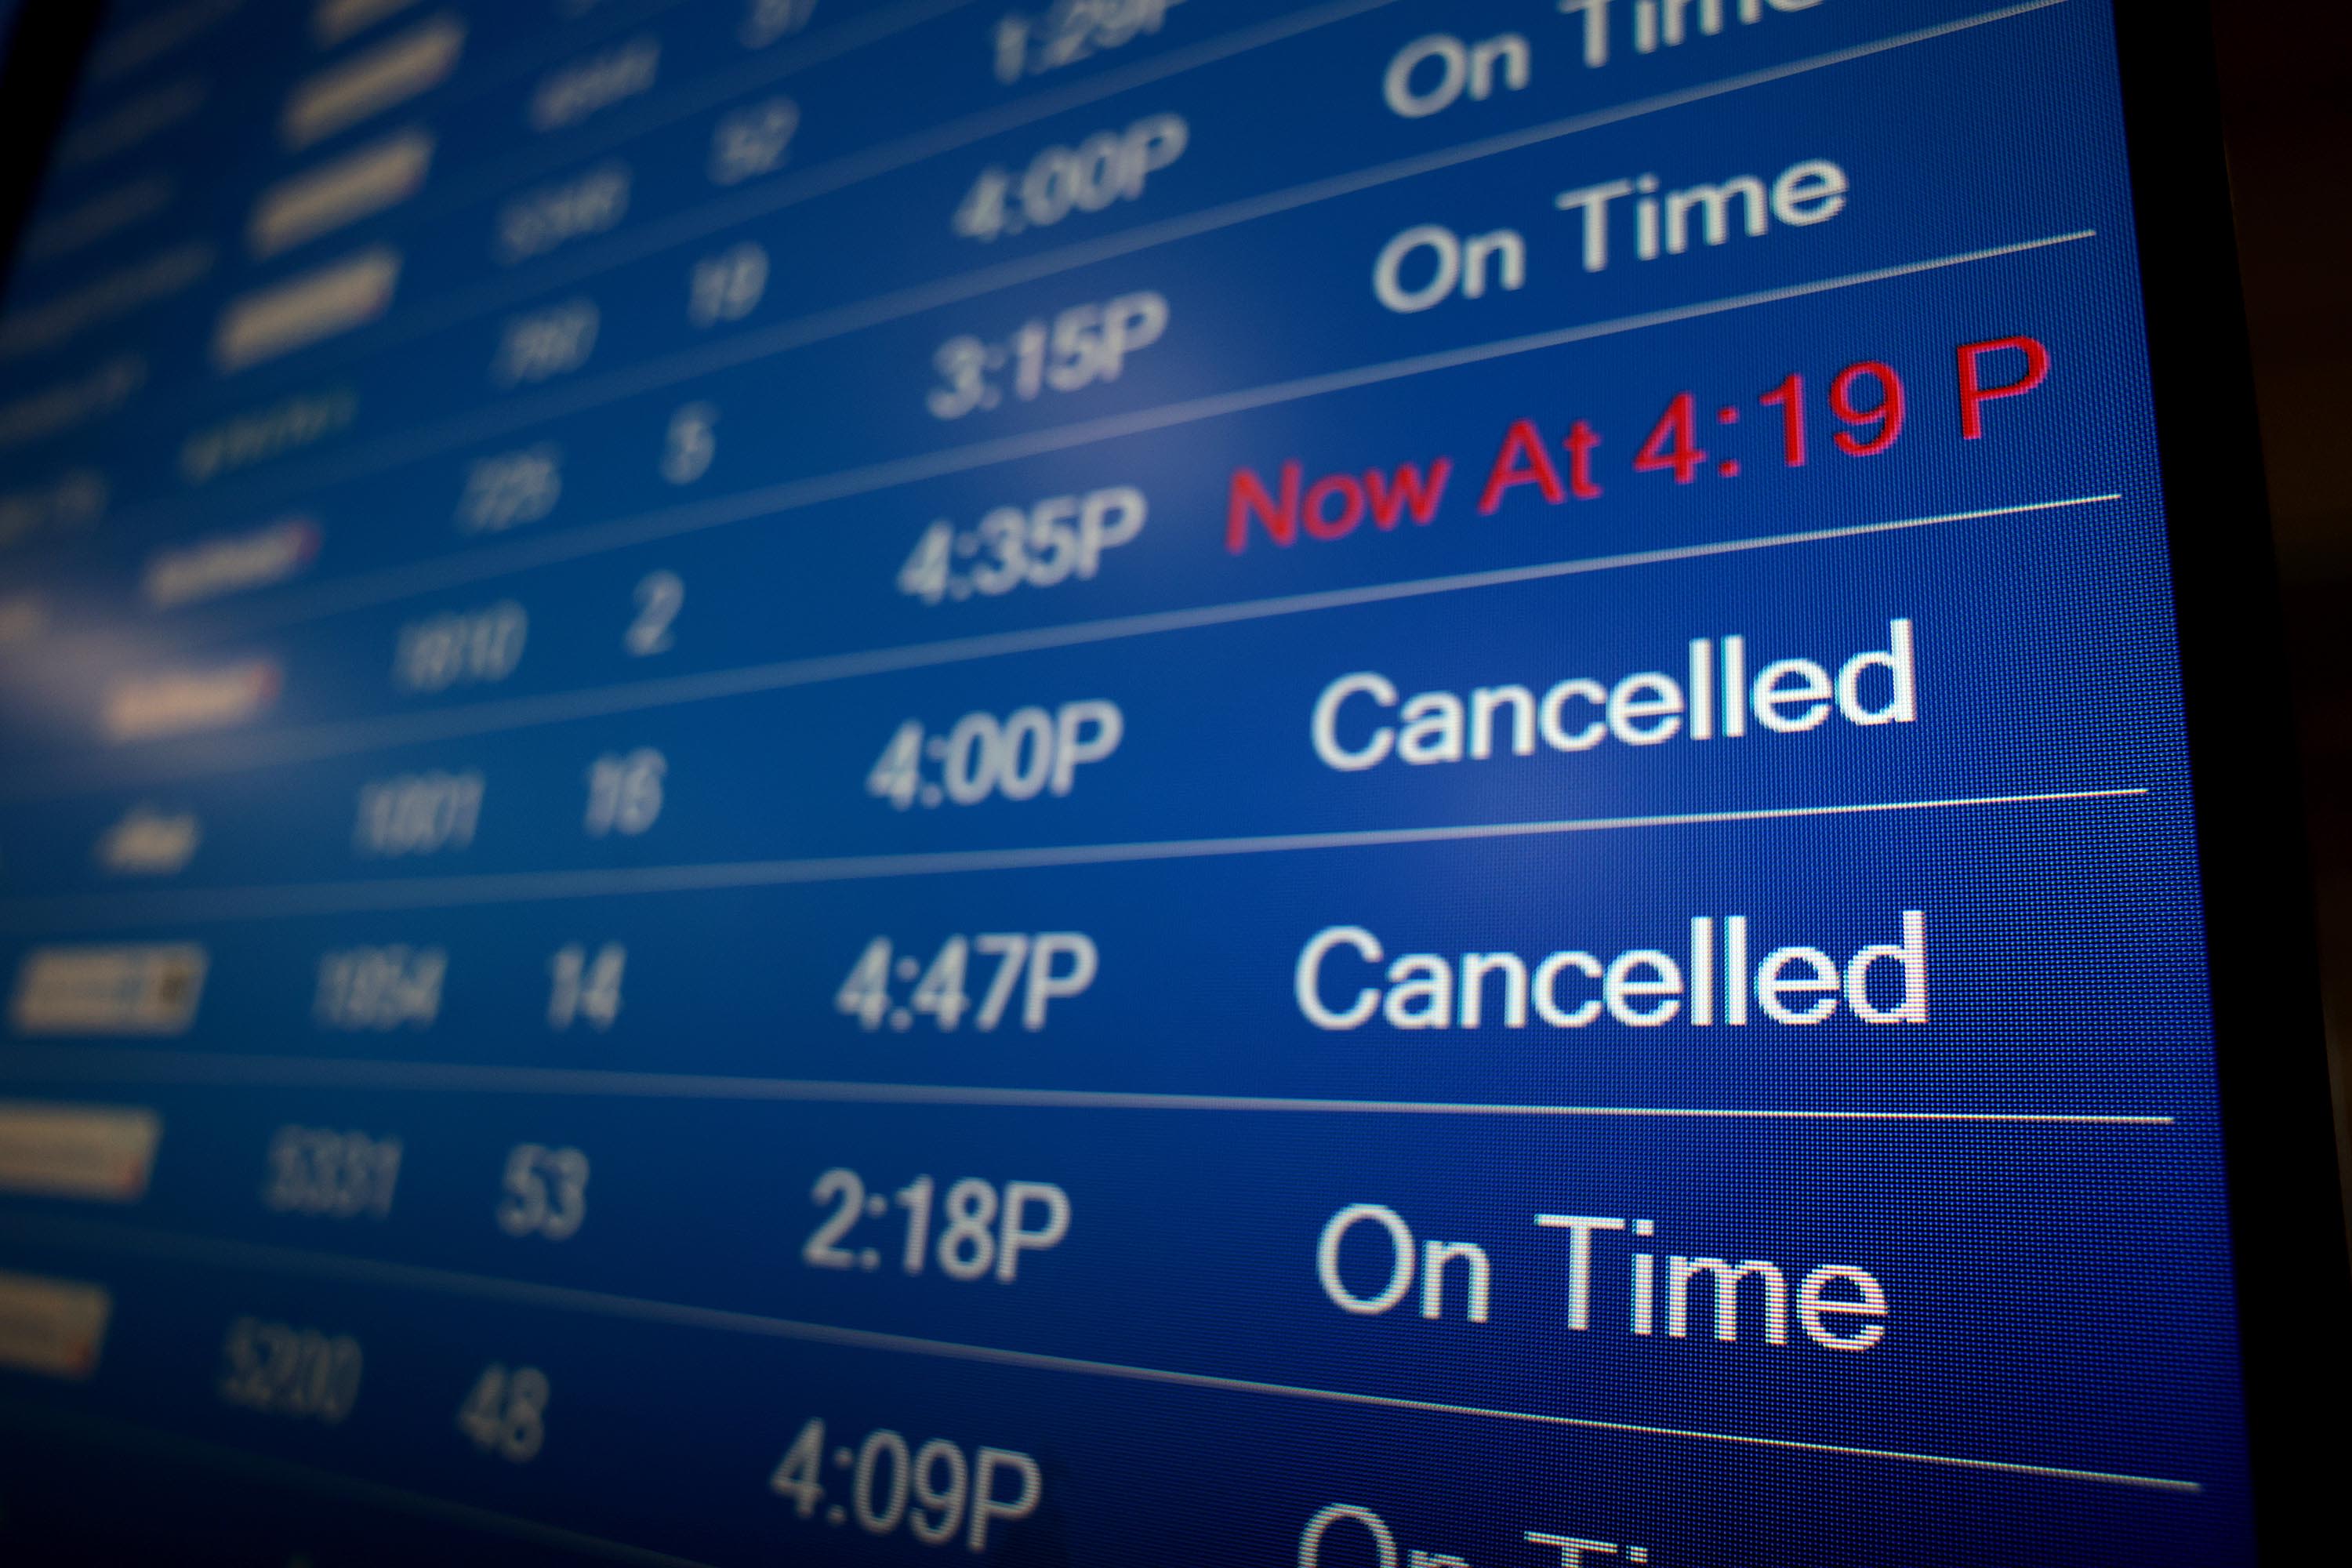 Big Data to avoid weather related flight delays